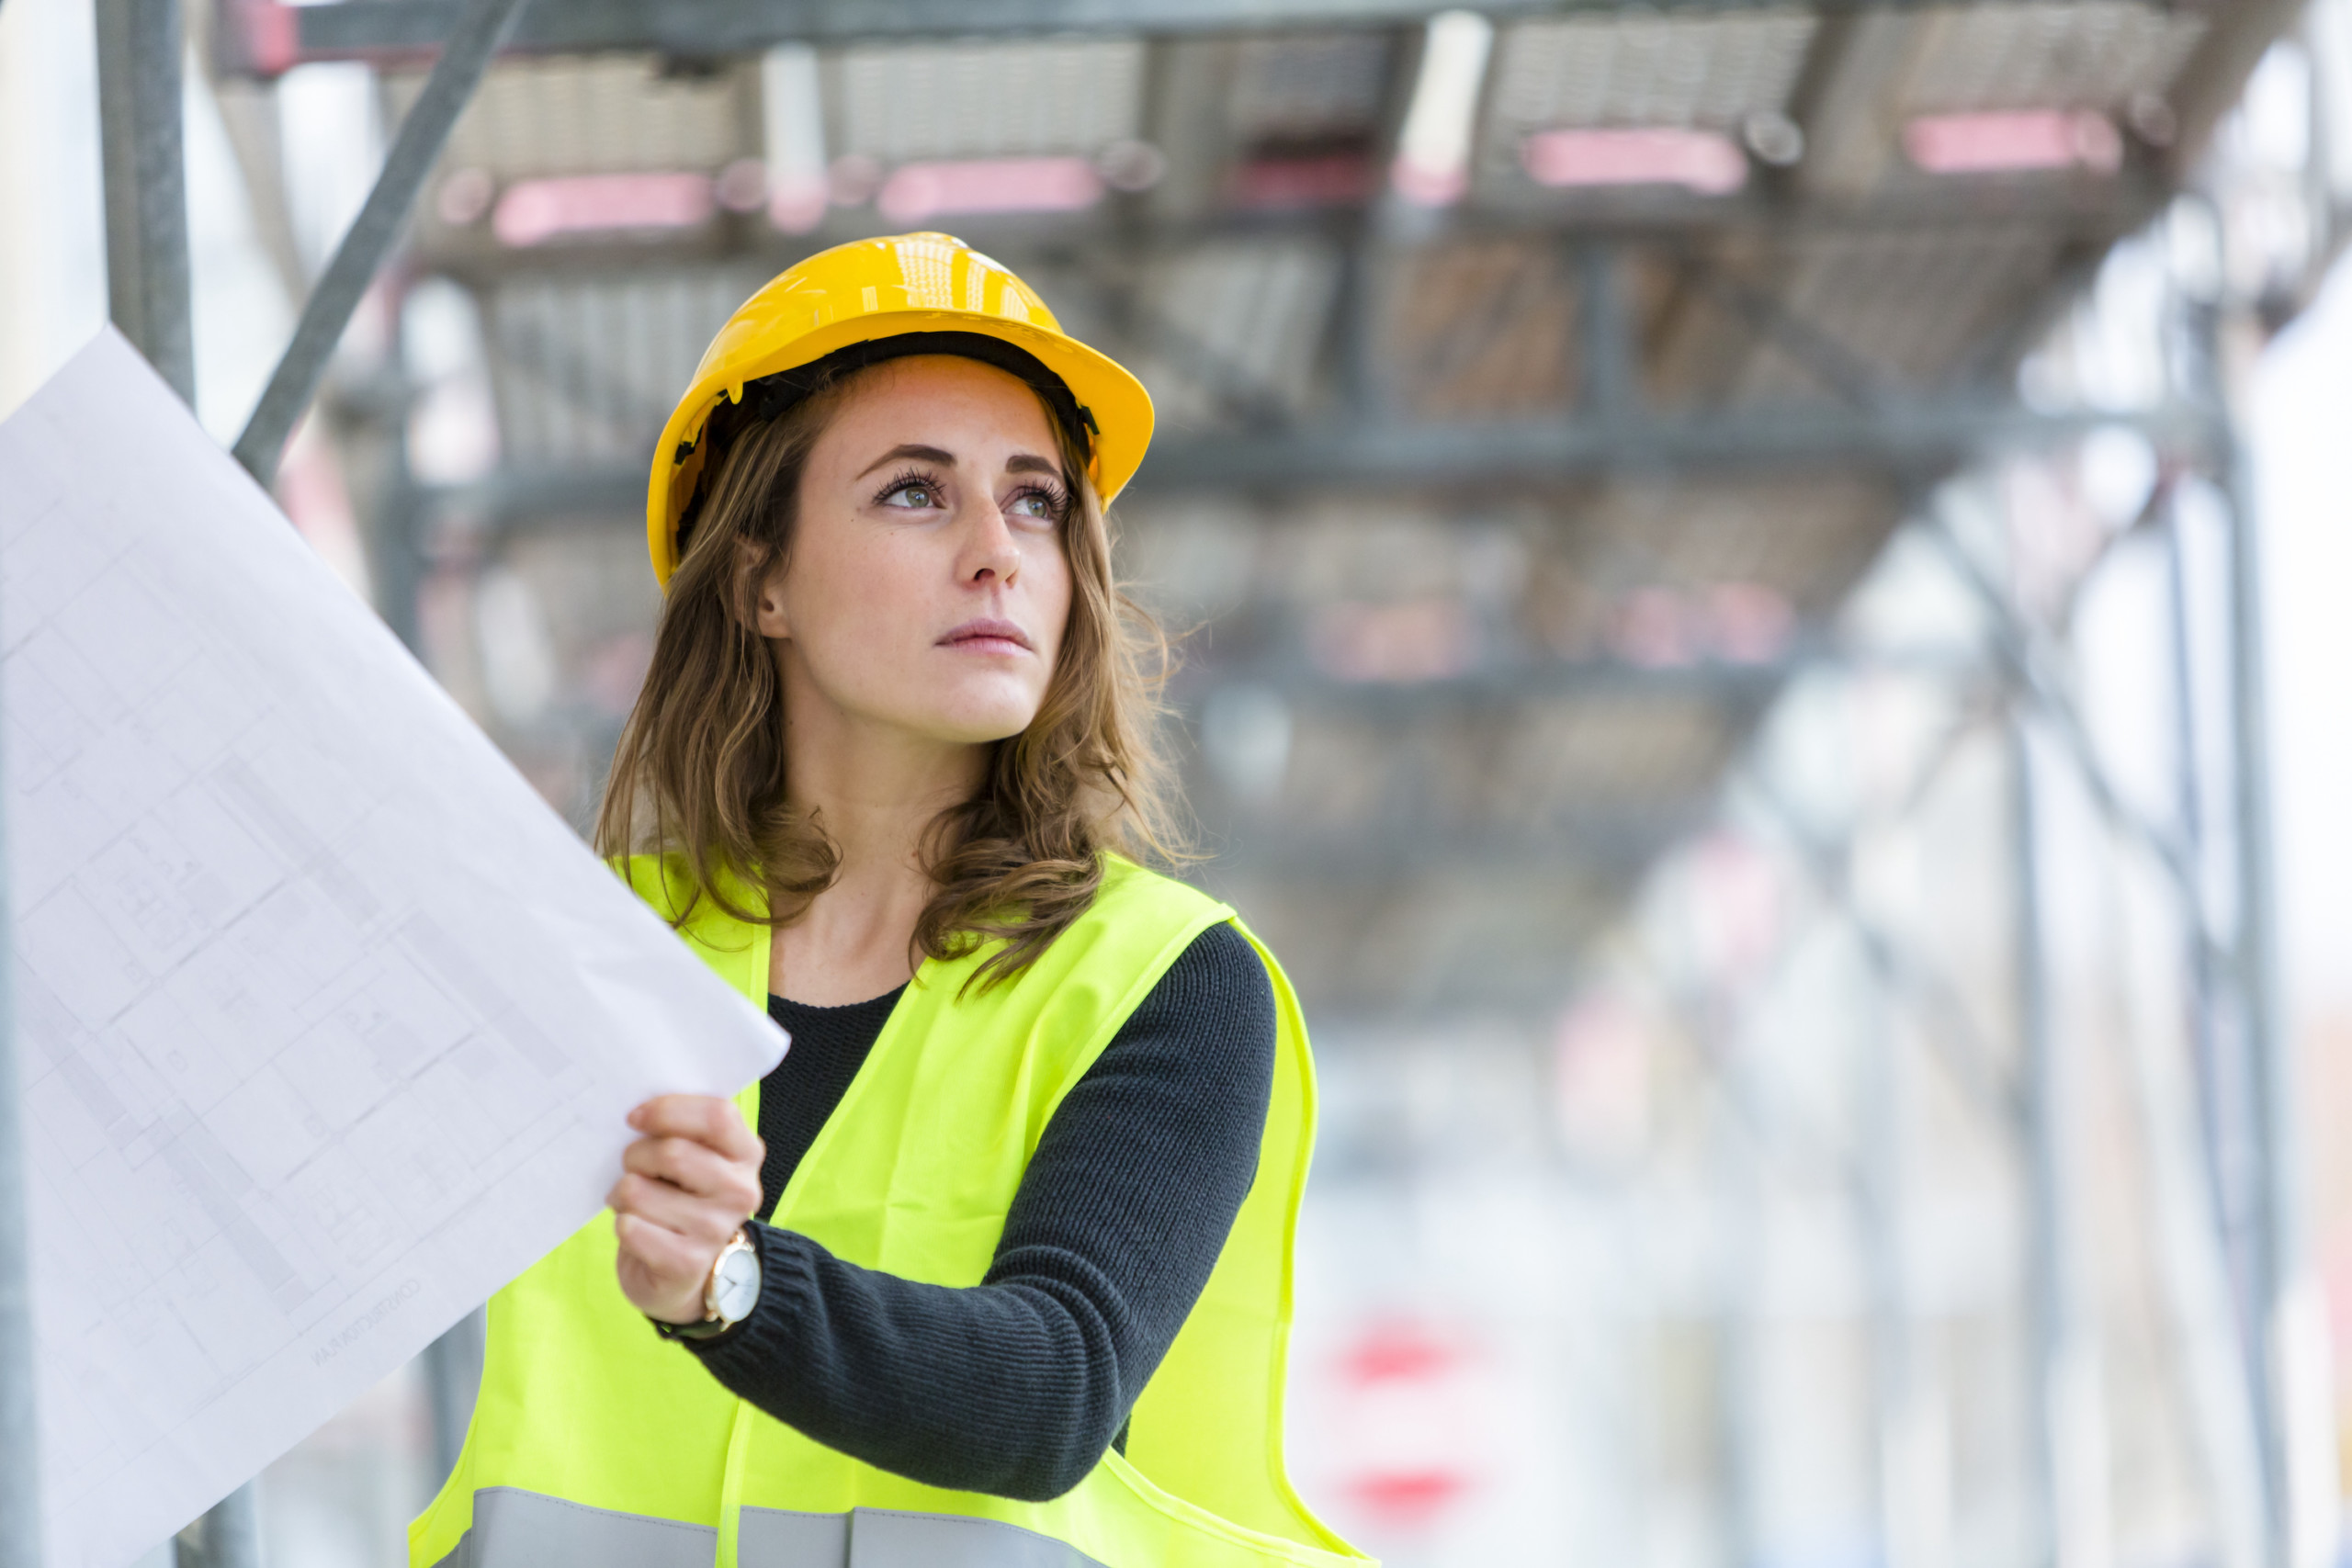 ‘Where’s the Women?’: Renewable Energy Industry Leaders Discuss Ways to Increase Female Representation in Groups Working on Building Safety and Fire Safety